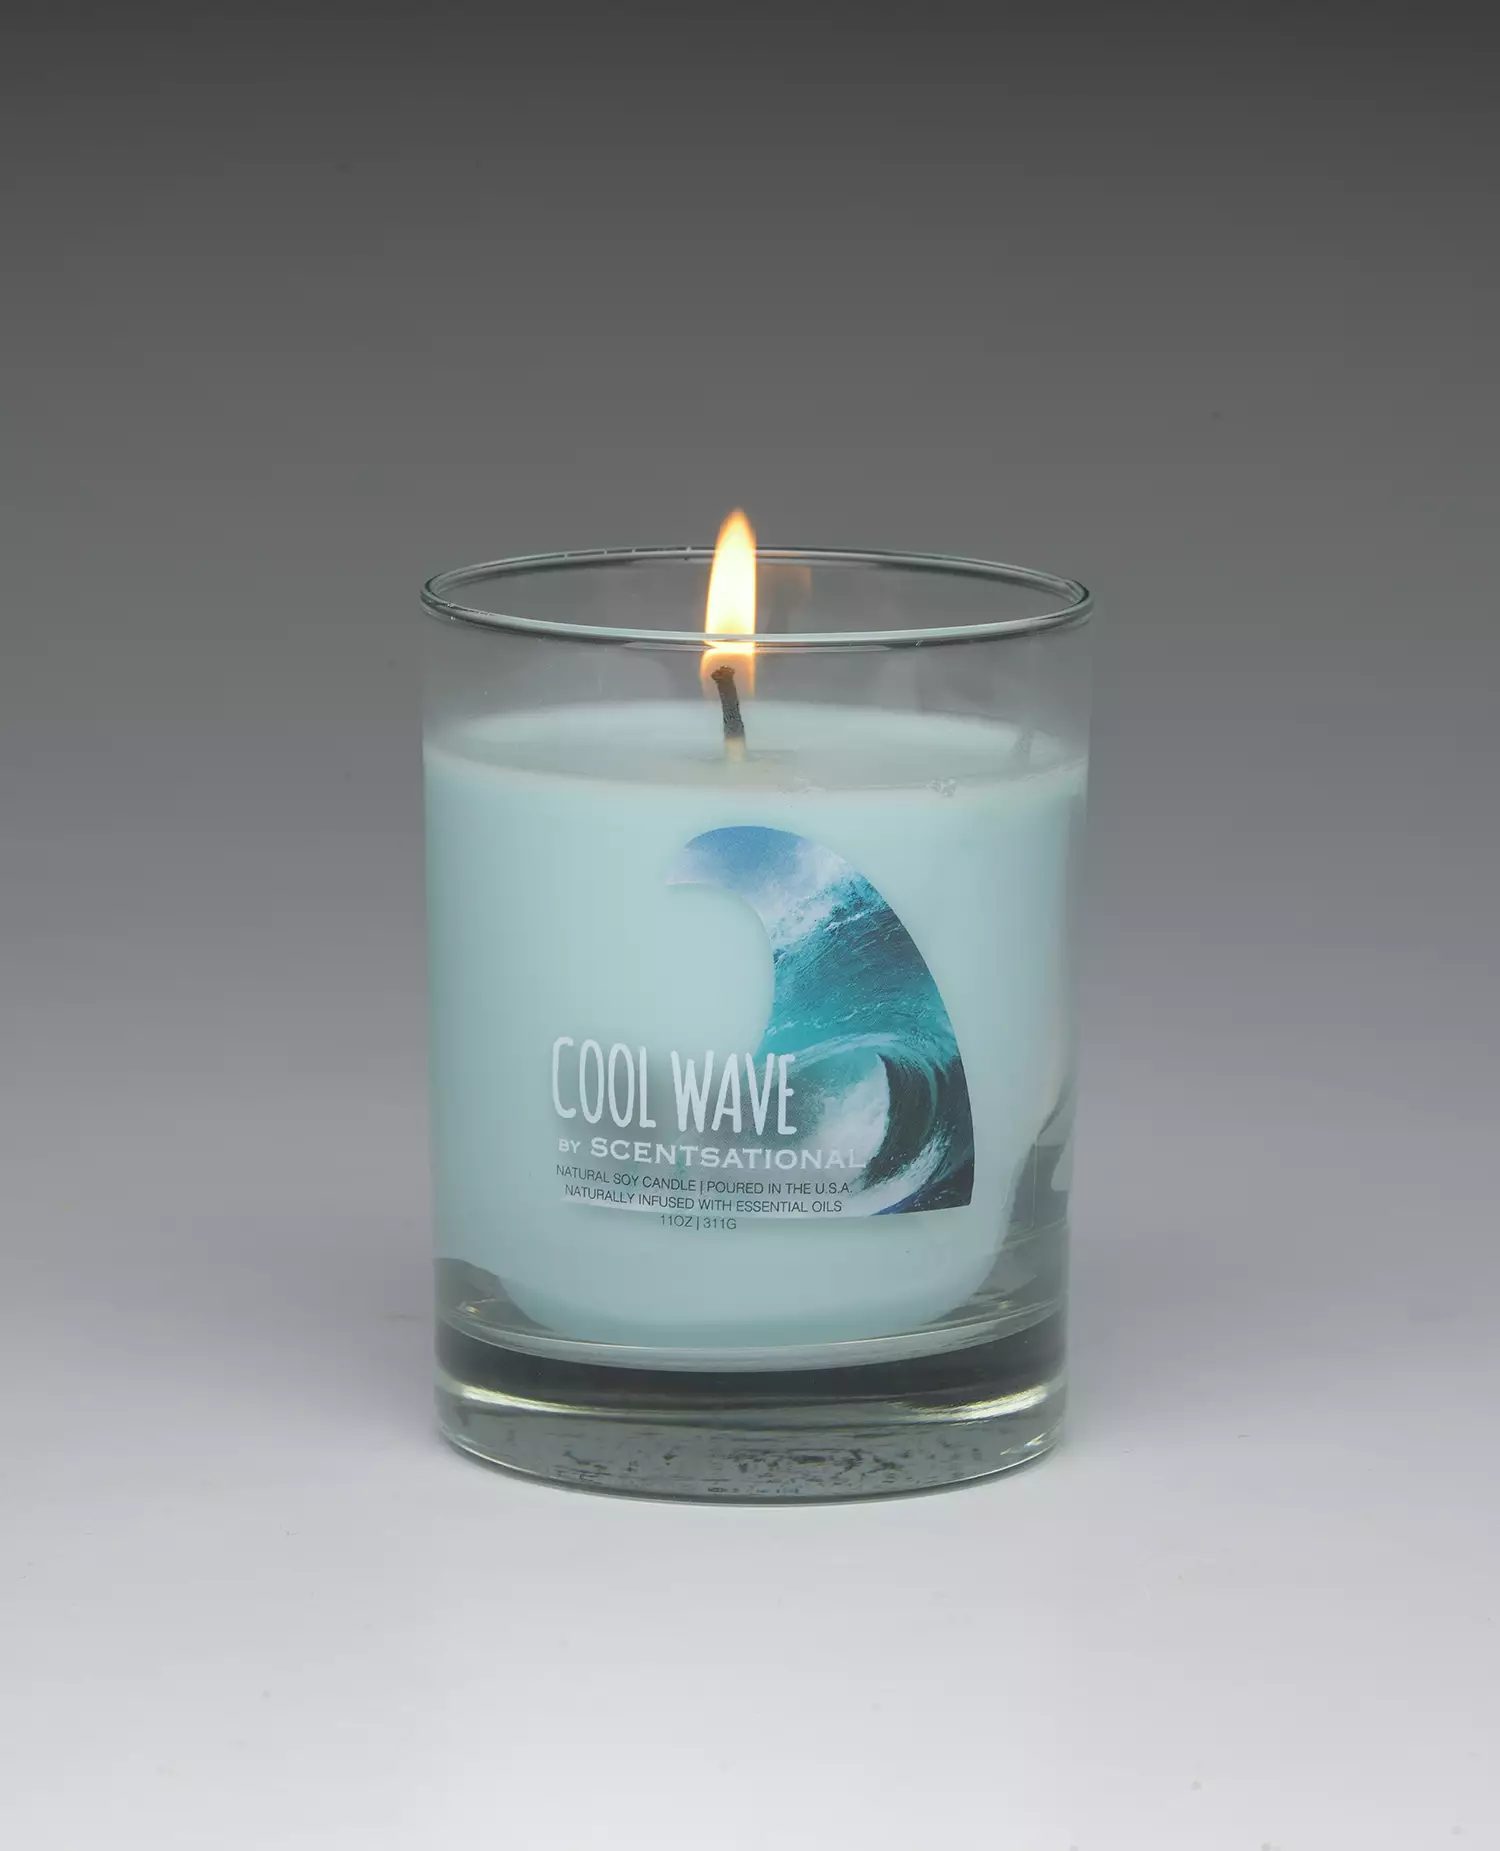 Cool Wave – 11oz scented candle burning